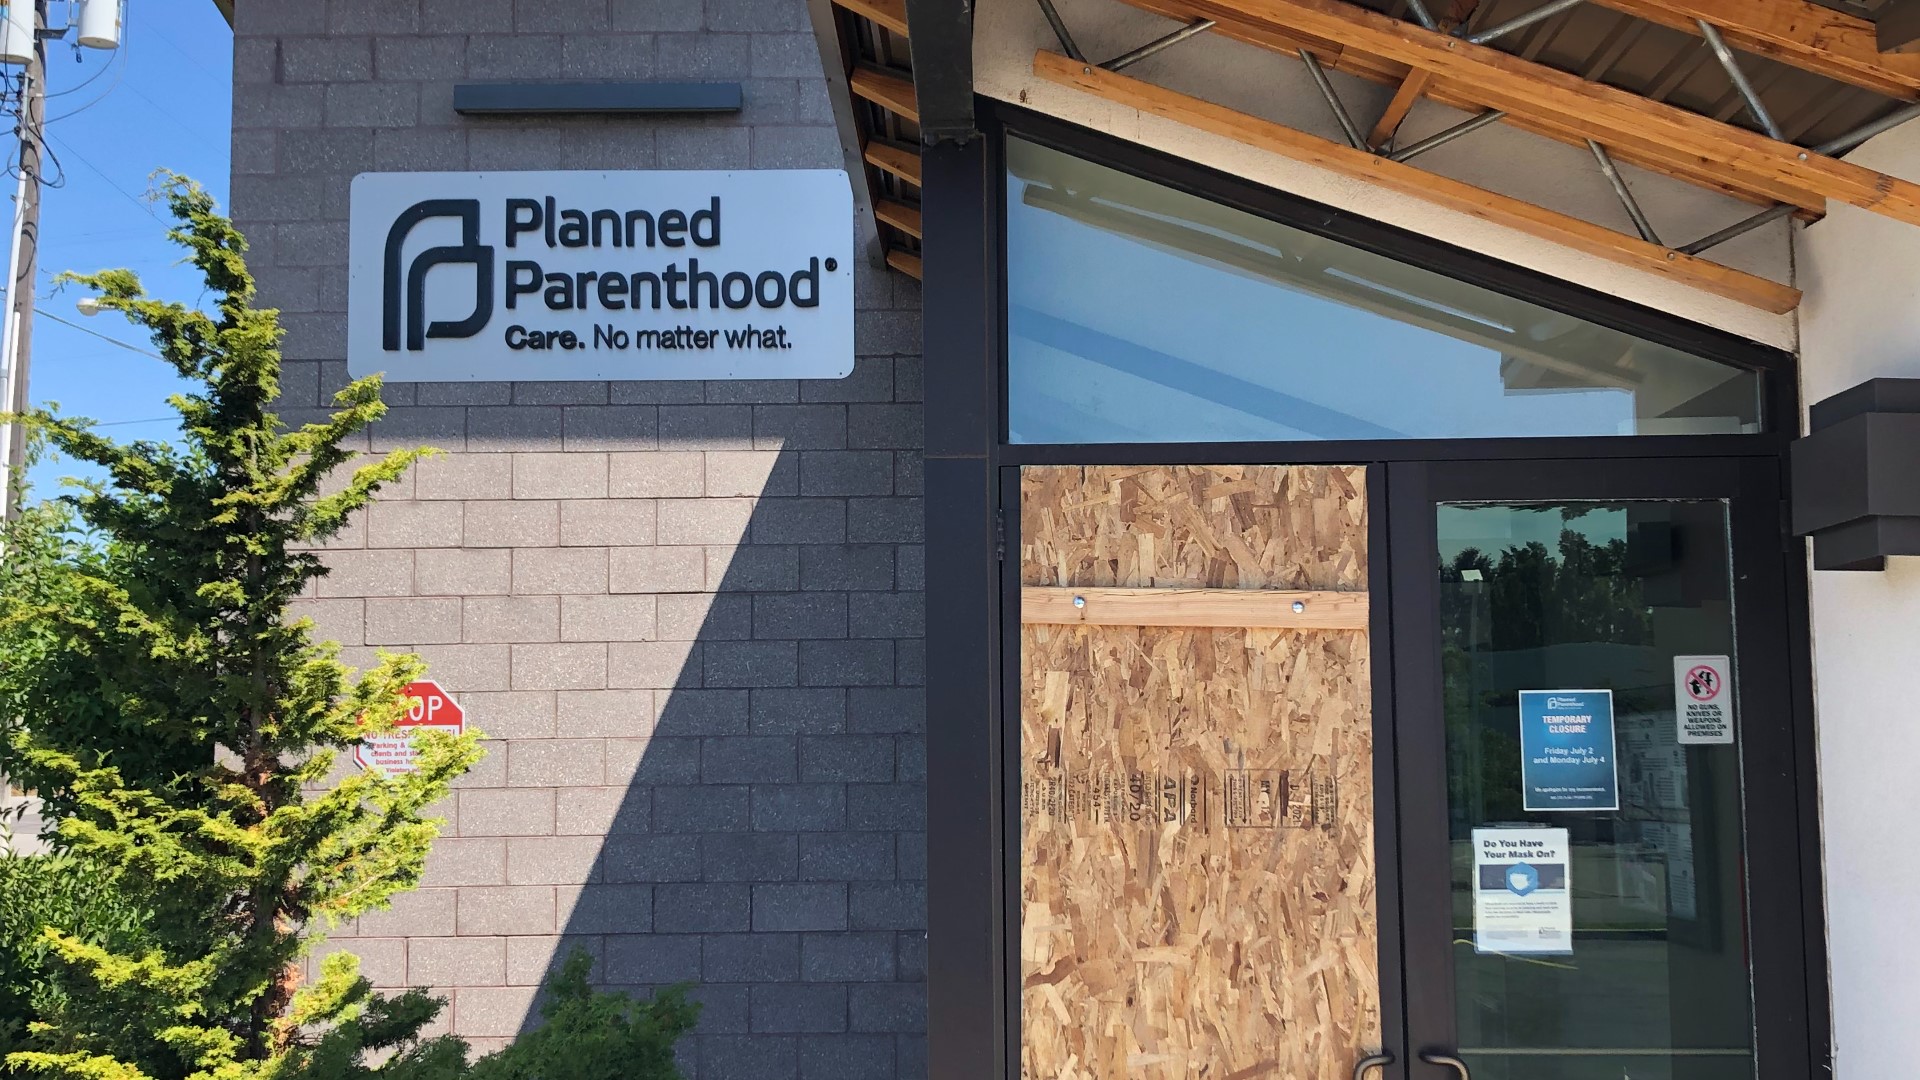 Planned Parenthood filed a new lawsuit on Monday, which challenges the full abortion trigger ban that will outlaw all abortion 30 days after the SCOTUS decision.